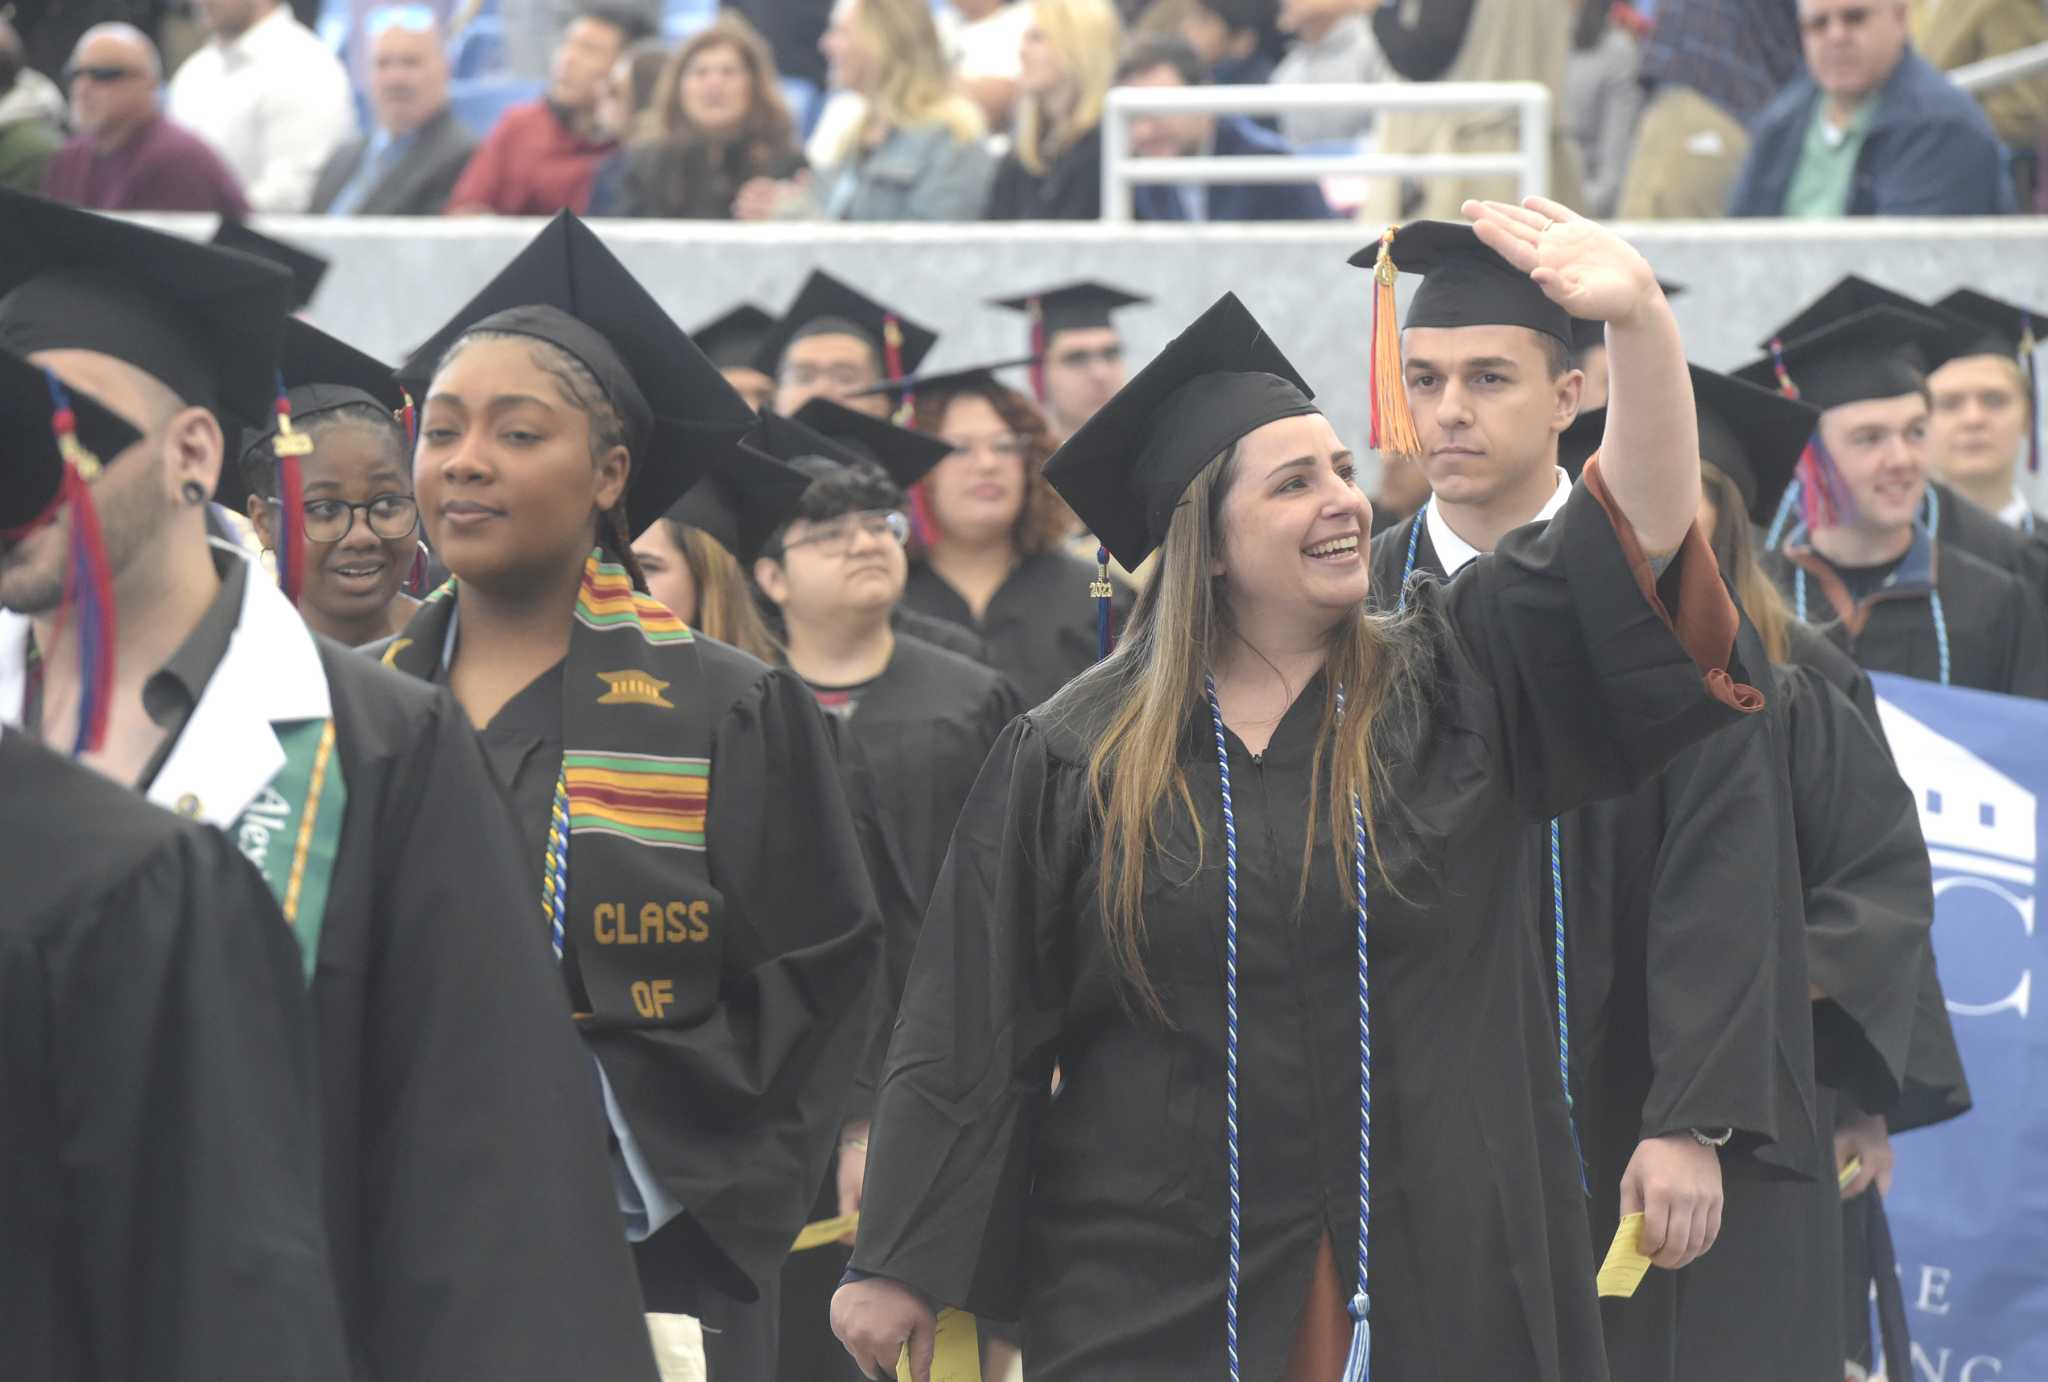 Over 600 students graduate from Norwalk Community College